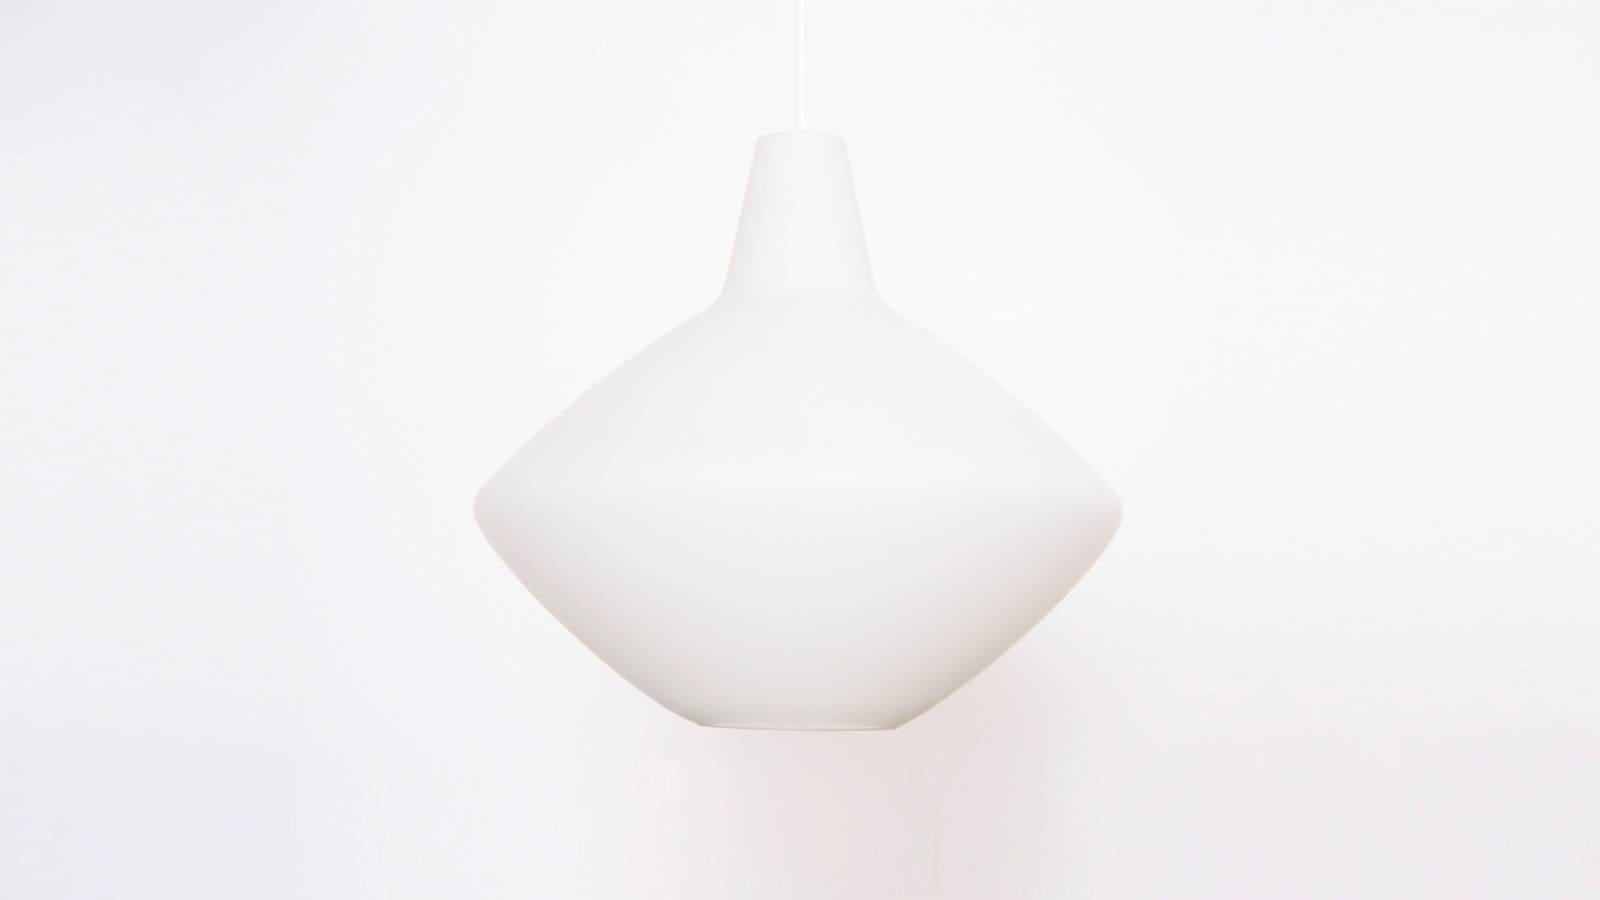 Pair of Lisa Johansson-Pape Kantiga Iöken glass pendant lamp in excellent condition.
To be on the safe side, the lamp should be checked locally by a specialist concerning local requirements.